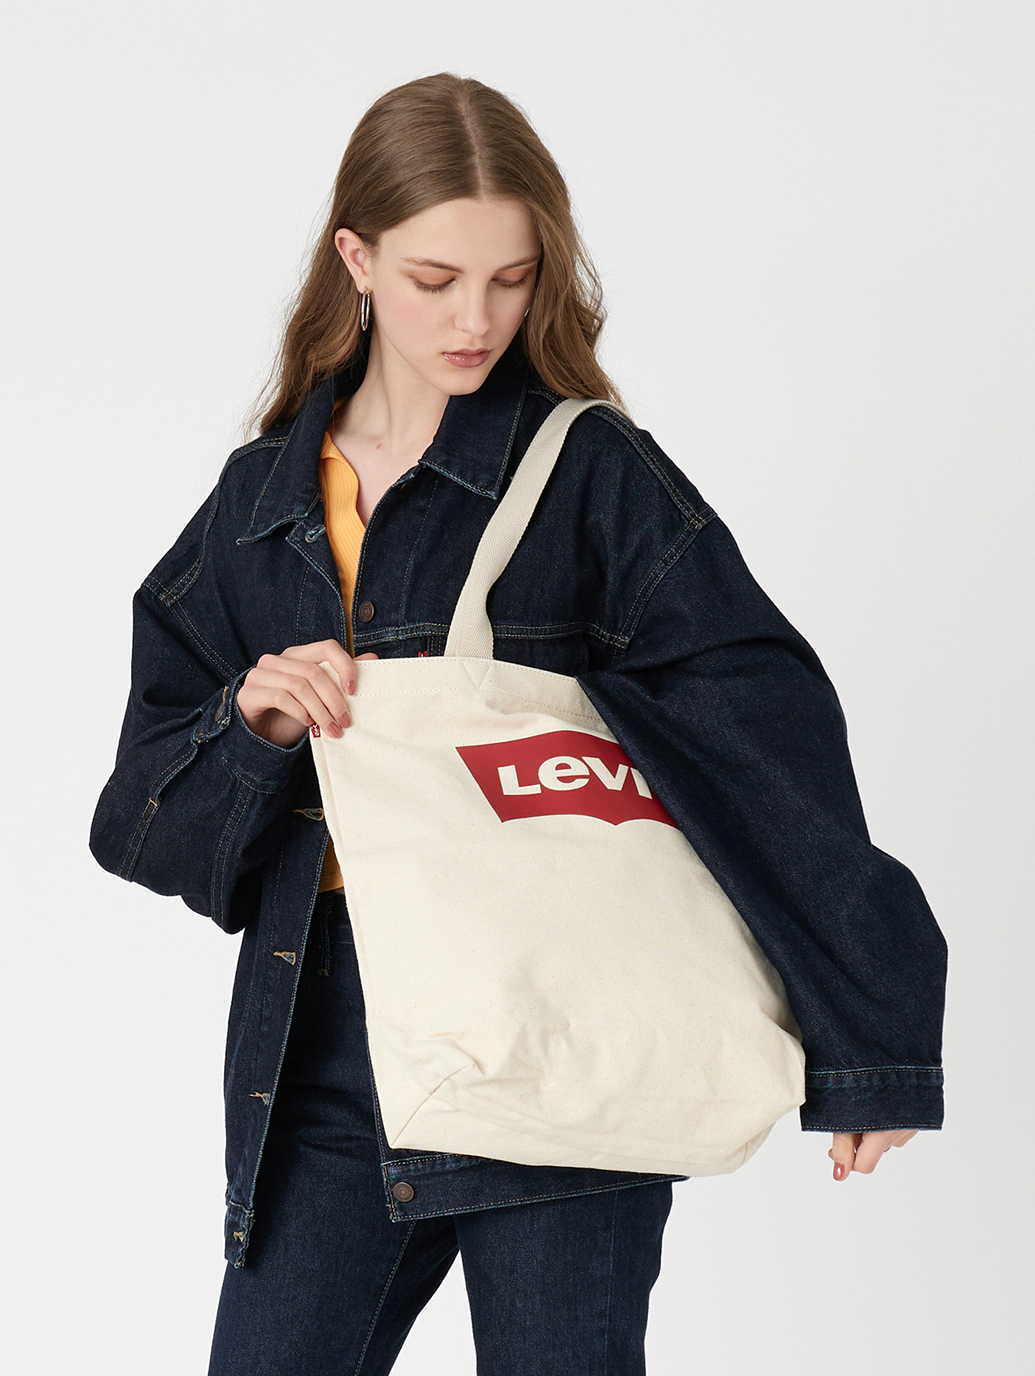 Levi's® Accessoryバットウィングトートバッグ｜リーバイス® 公式通販